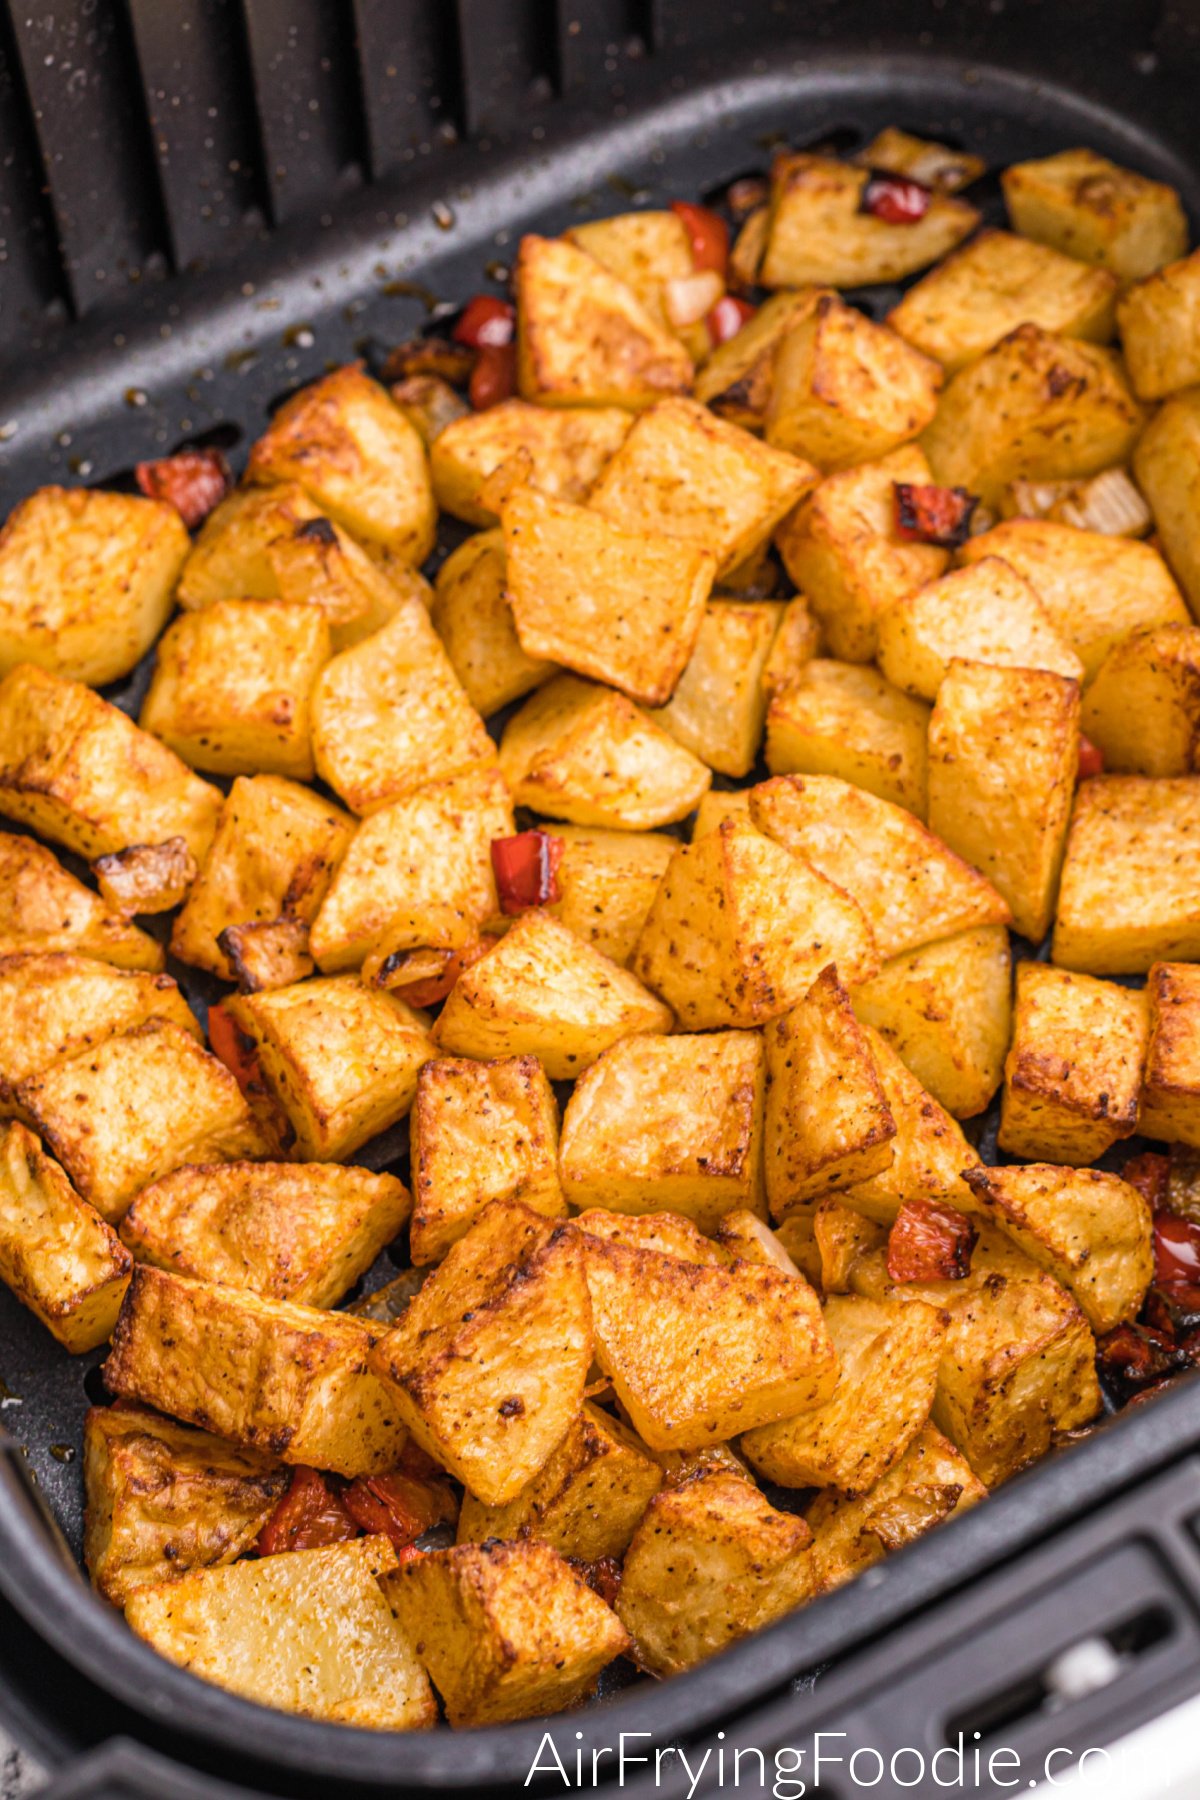 Home Fries in the basket of the air fryer, seasoned and ready to eat. 